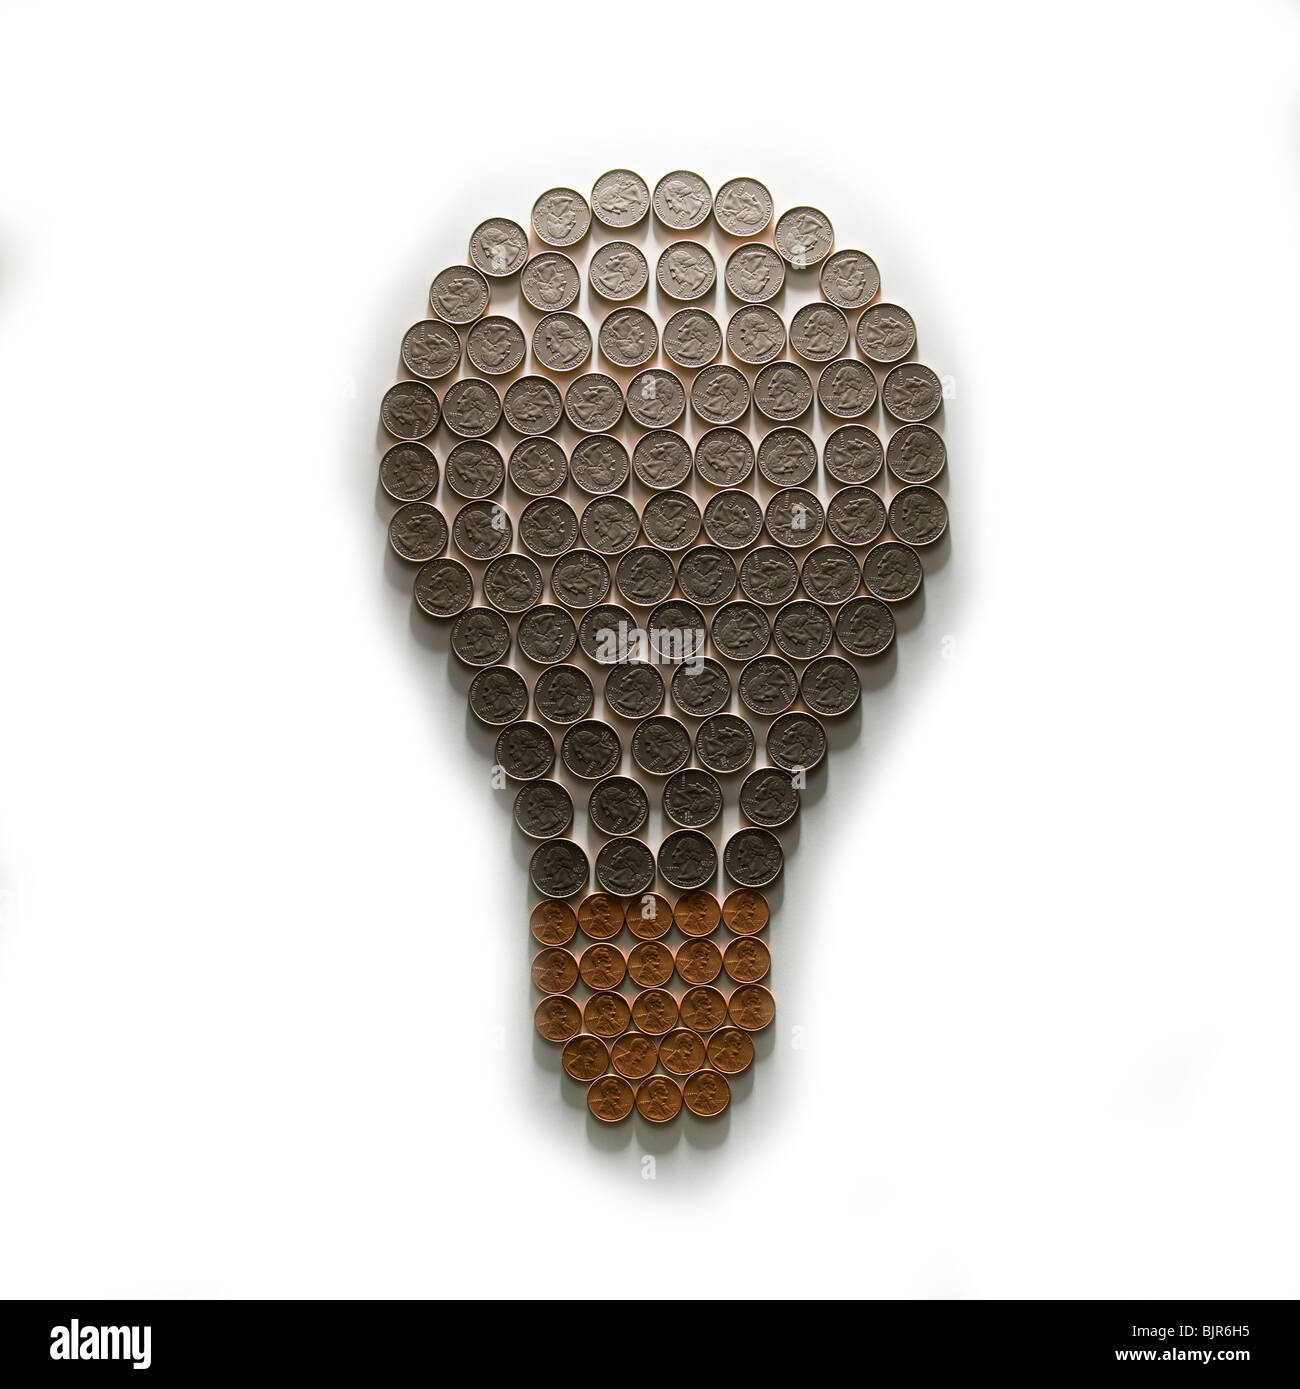 light bulb made out of dimes and pennies Stock Photo